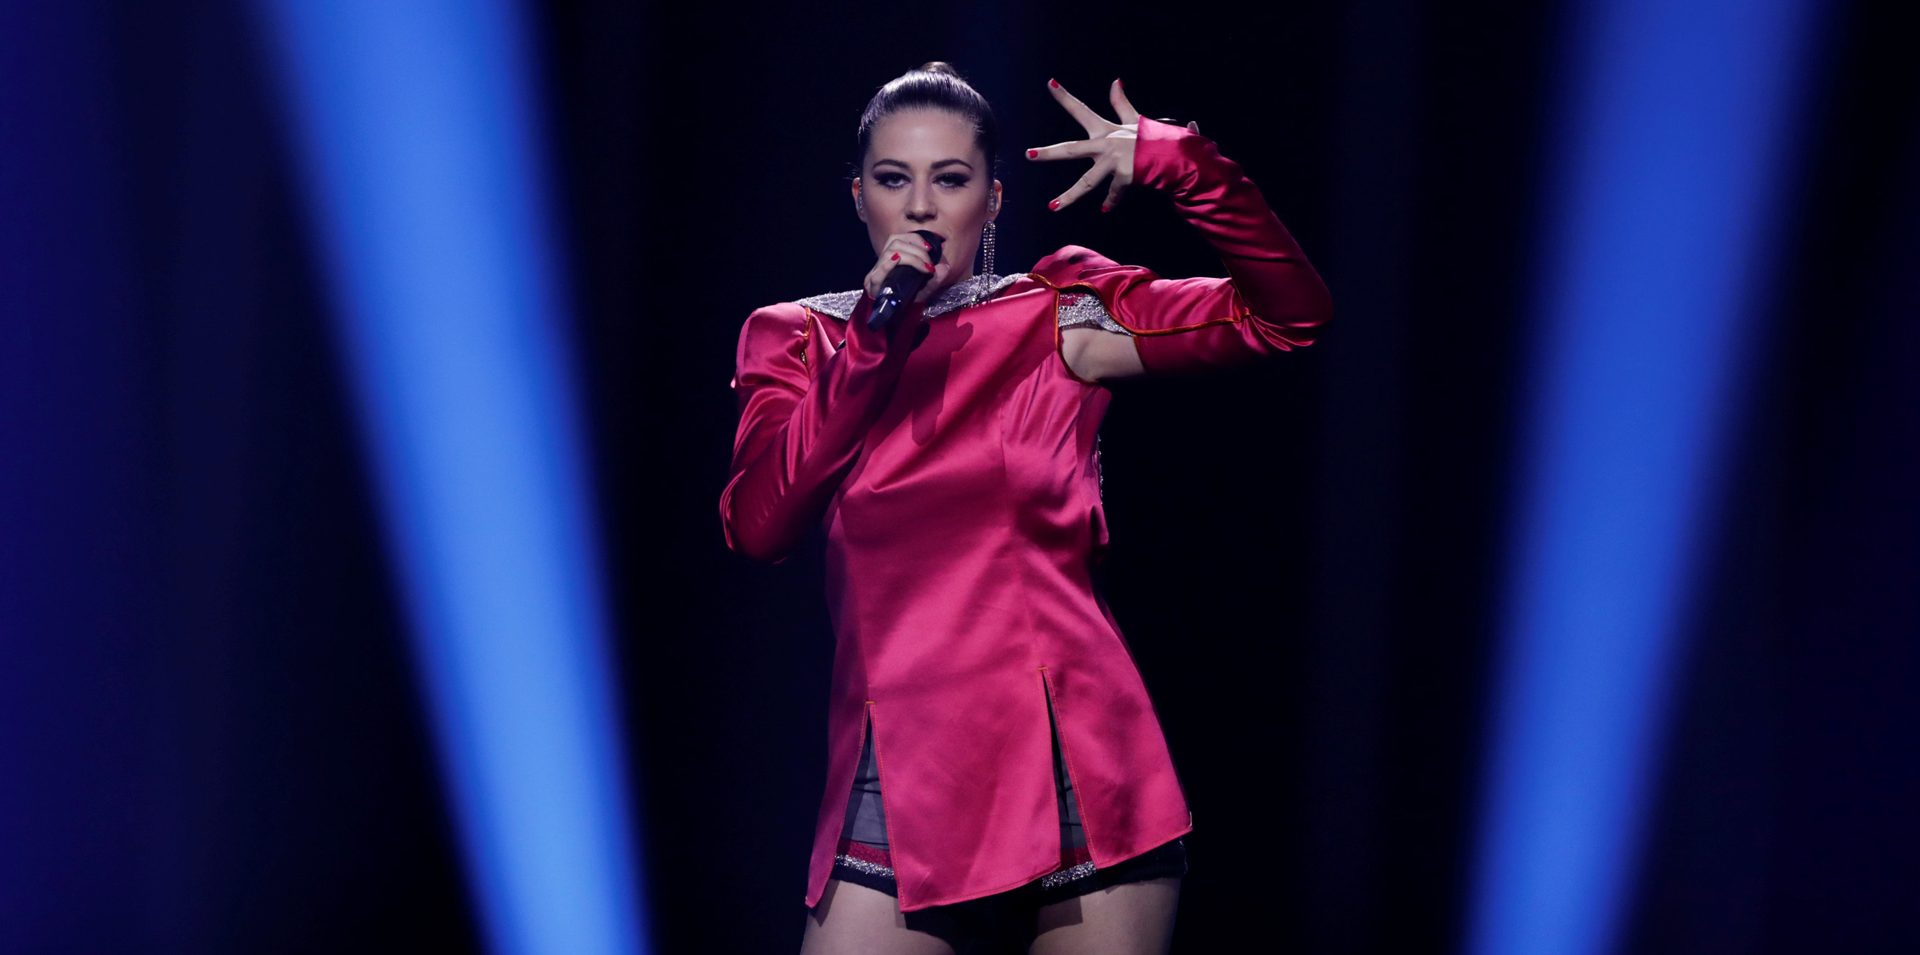 Barbara Dex Award: Who was the worst dressed act at Eurovision 2018?